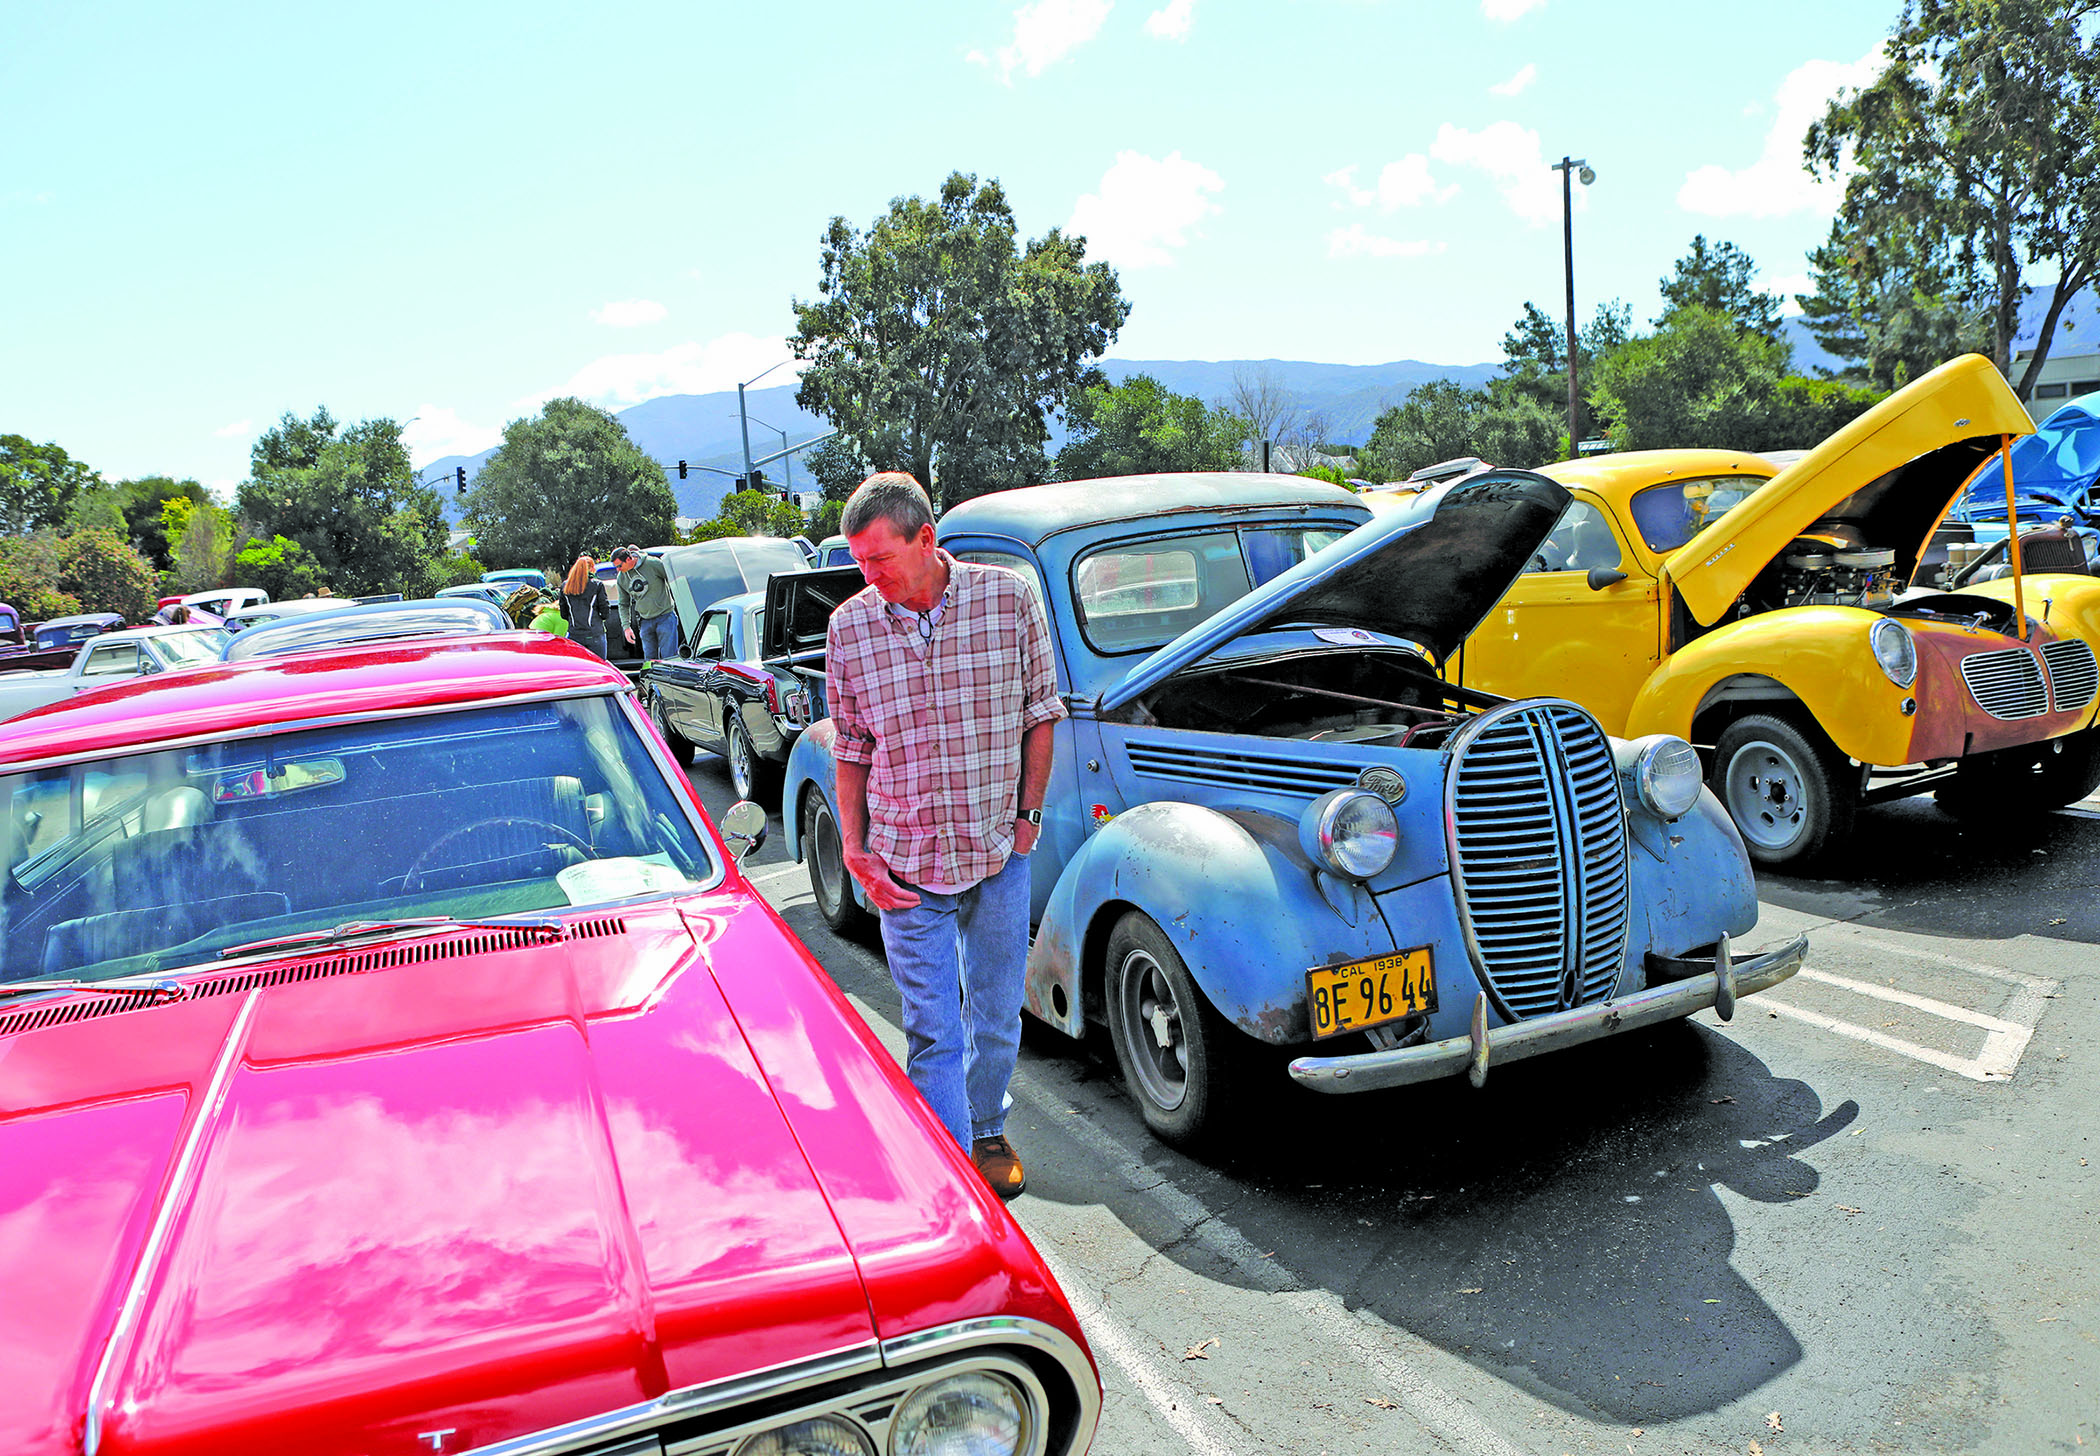 Pirate Garage car show set for March 16